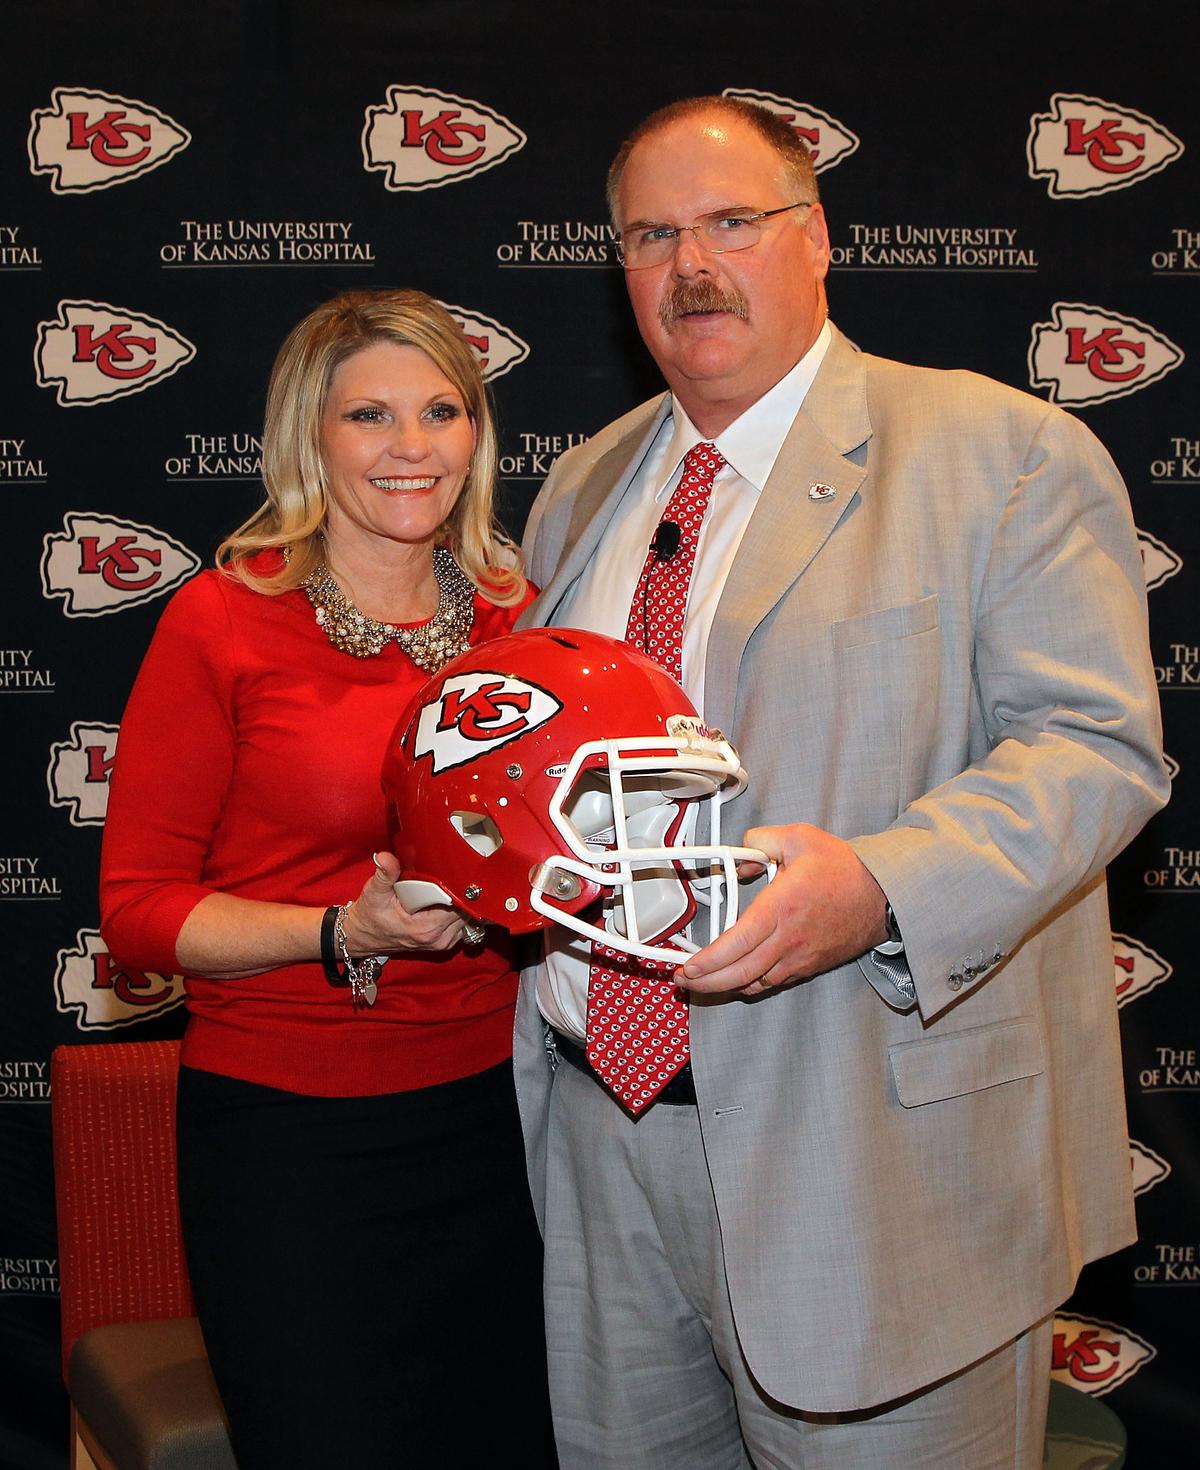 Andy Reid with his wife, Tammy, during a press conference in Kansas City, Missouri, introducing Reid as the Kansas City Chiefs new head coach on Jan. 7, 2013 (©Getty Images | <a href="https://www.gettyimages.com/detail/news-photo/andy-reid-poses-with-wife-tammy-during-a-press-conference-news-photo/159074845?adppopup=true">Jamie Squire</a>)